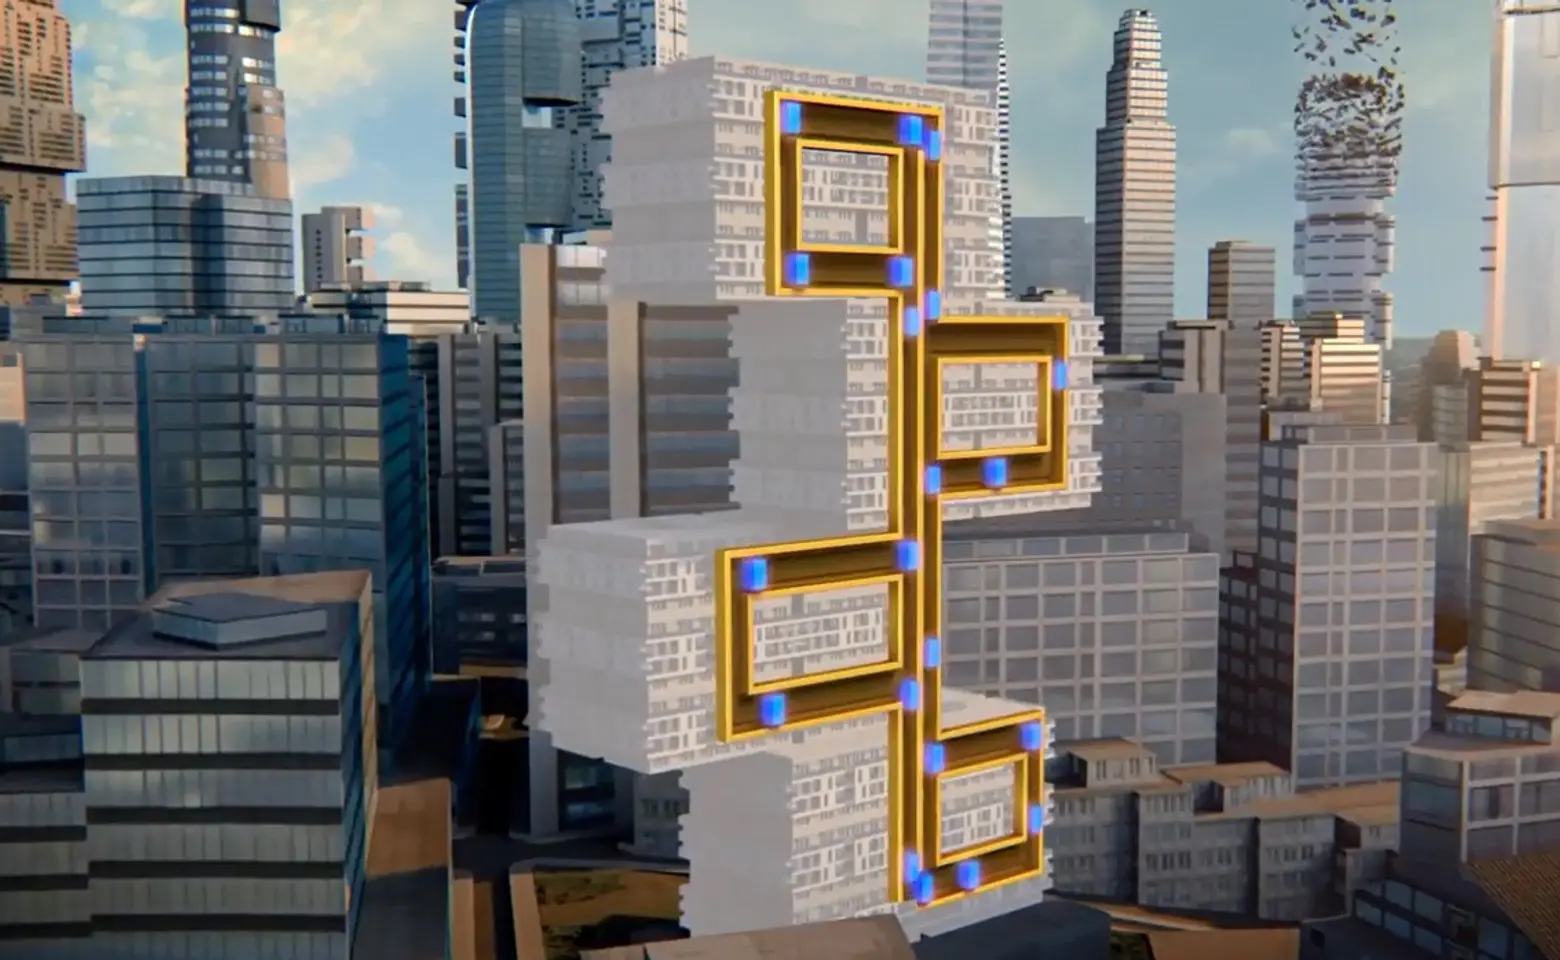 ThyssenKrupp’s New Elevator Could Revolutionize Skyscraper Design with Its Horizontal Capabilities